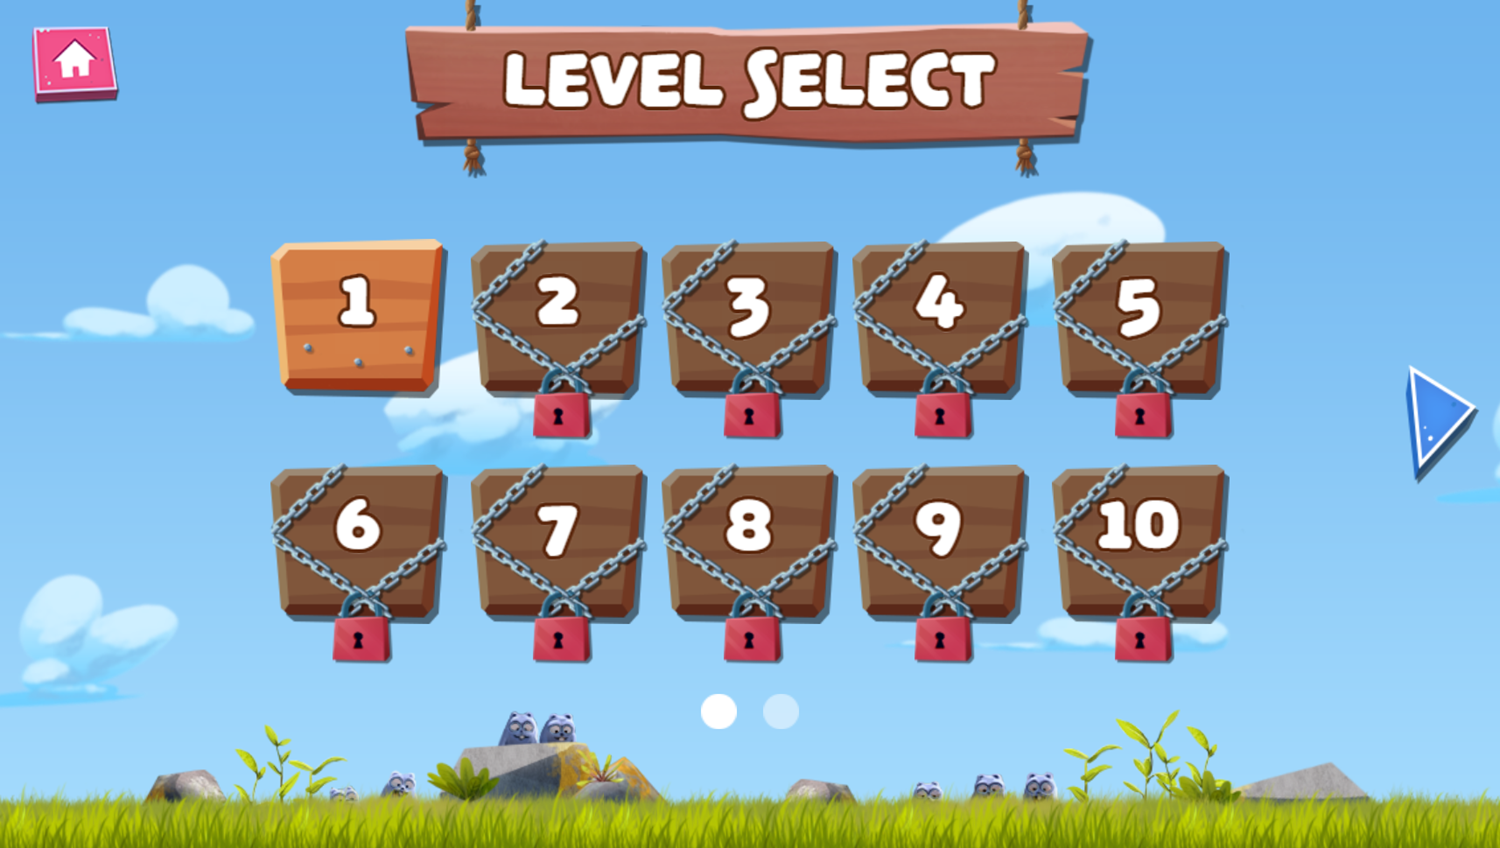 Grizzy and the Lemmings Lemmings Launch Game Level Select Screenshot.